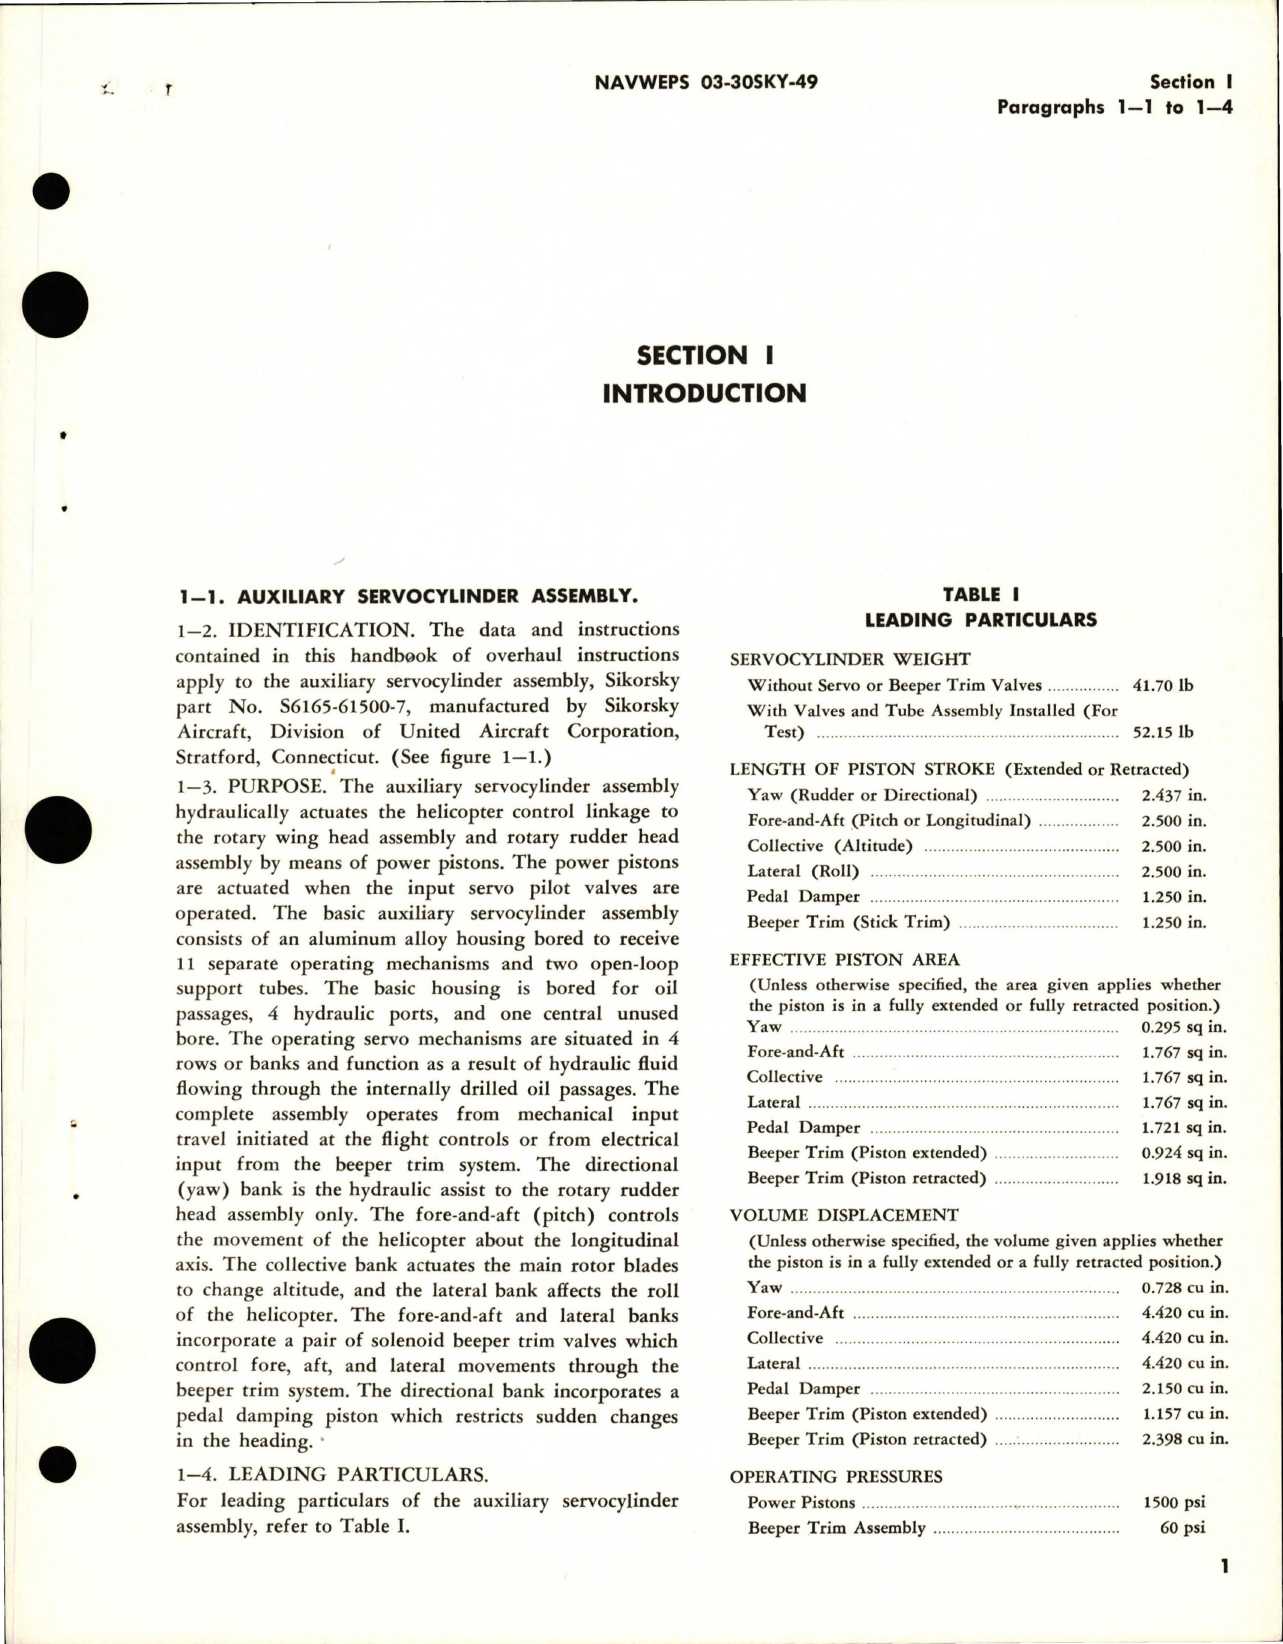 Sample page 5 from AirCorps Library document: Overhaul Instructions for Auxiliary Servocylinder Assembly - Parts S6165-61500-6, S6165-61500-7, and S6165-61500-10